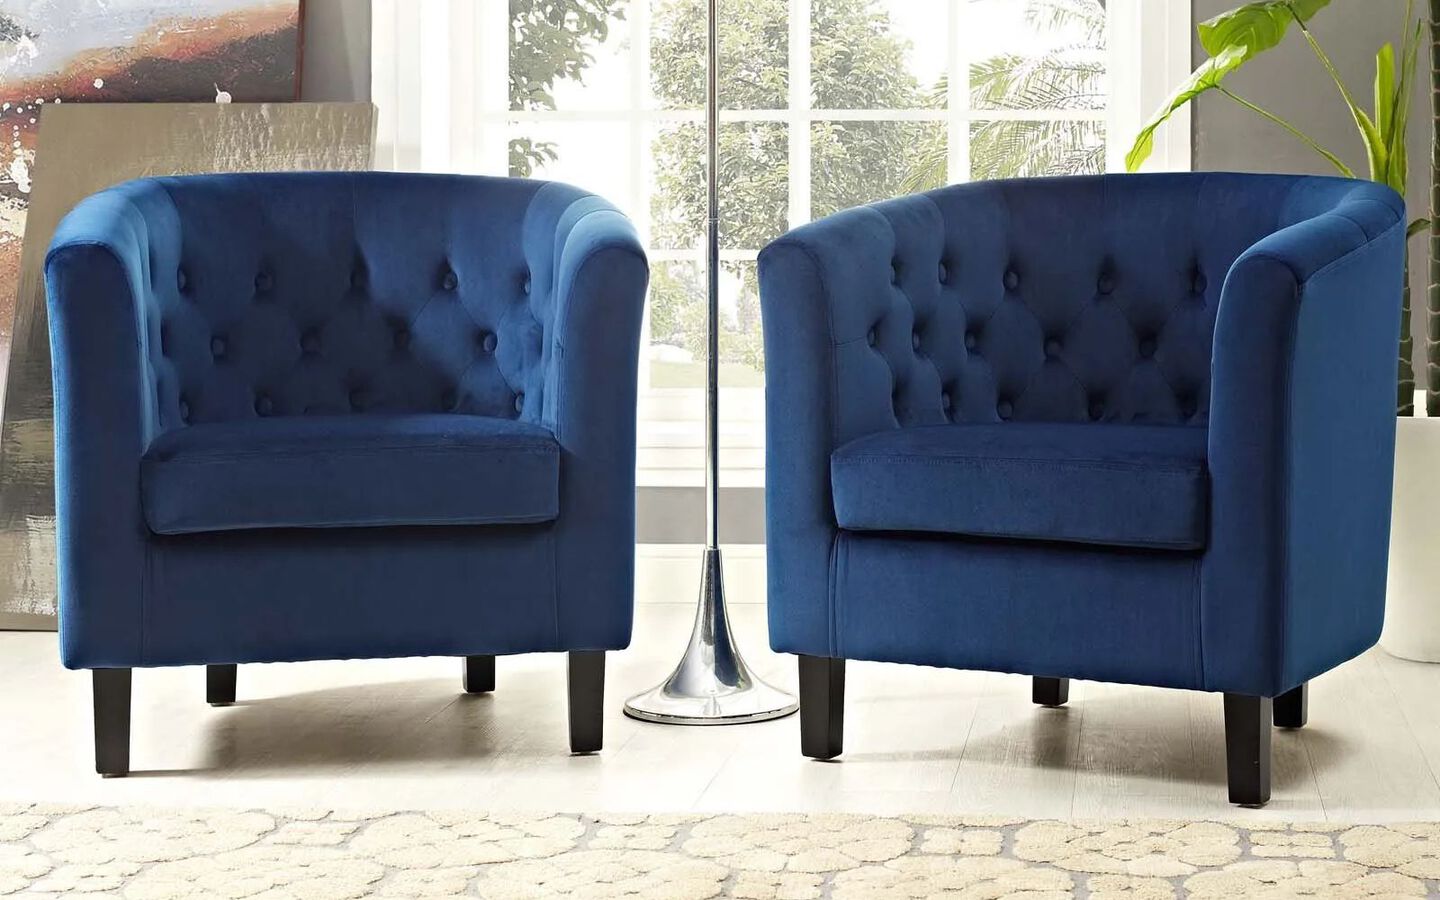 Two blue upholstered chairs sitting around a silver lamp